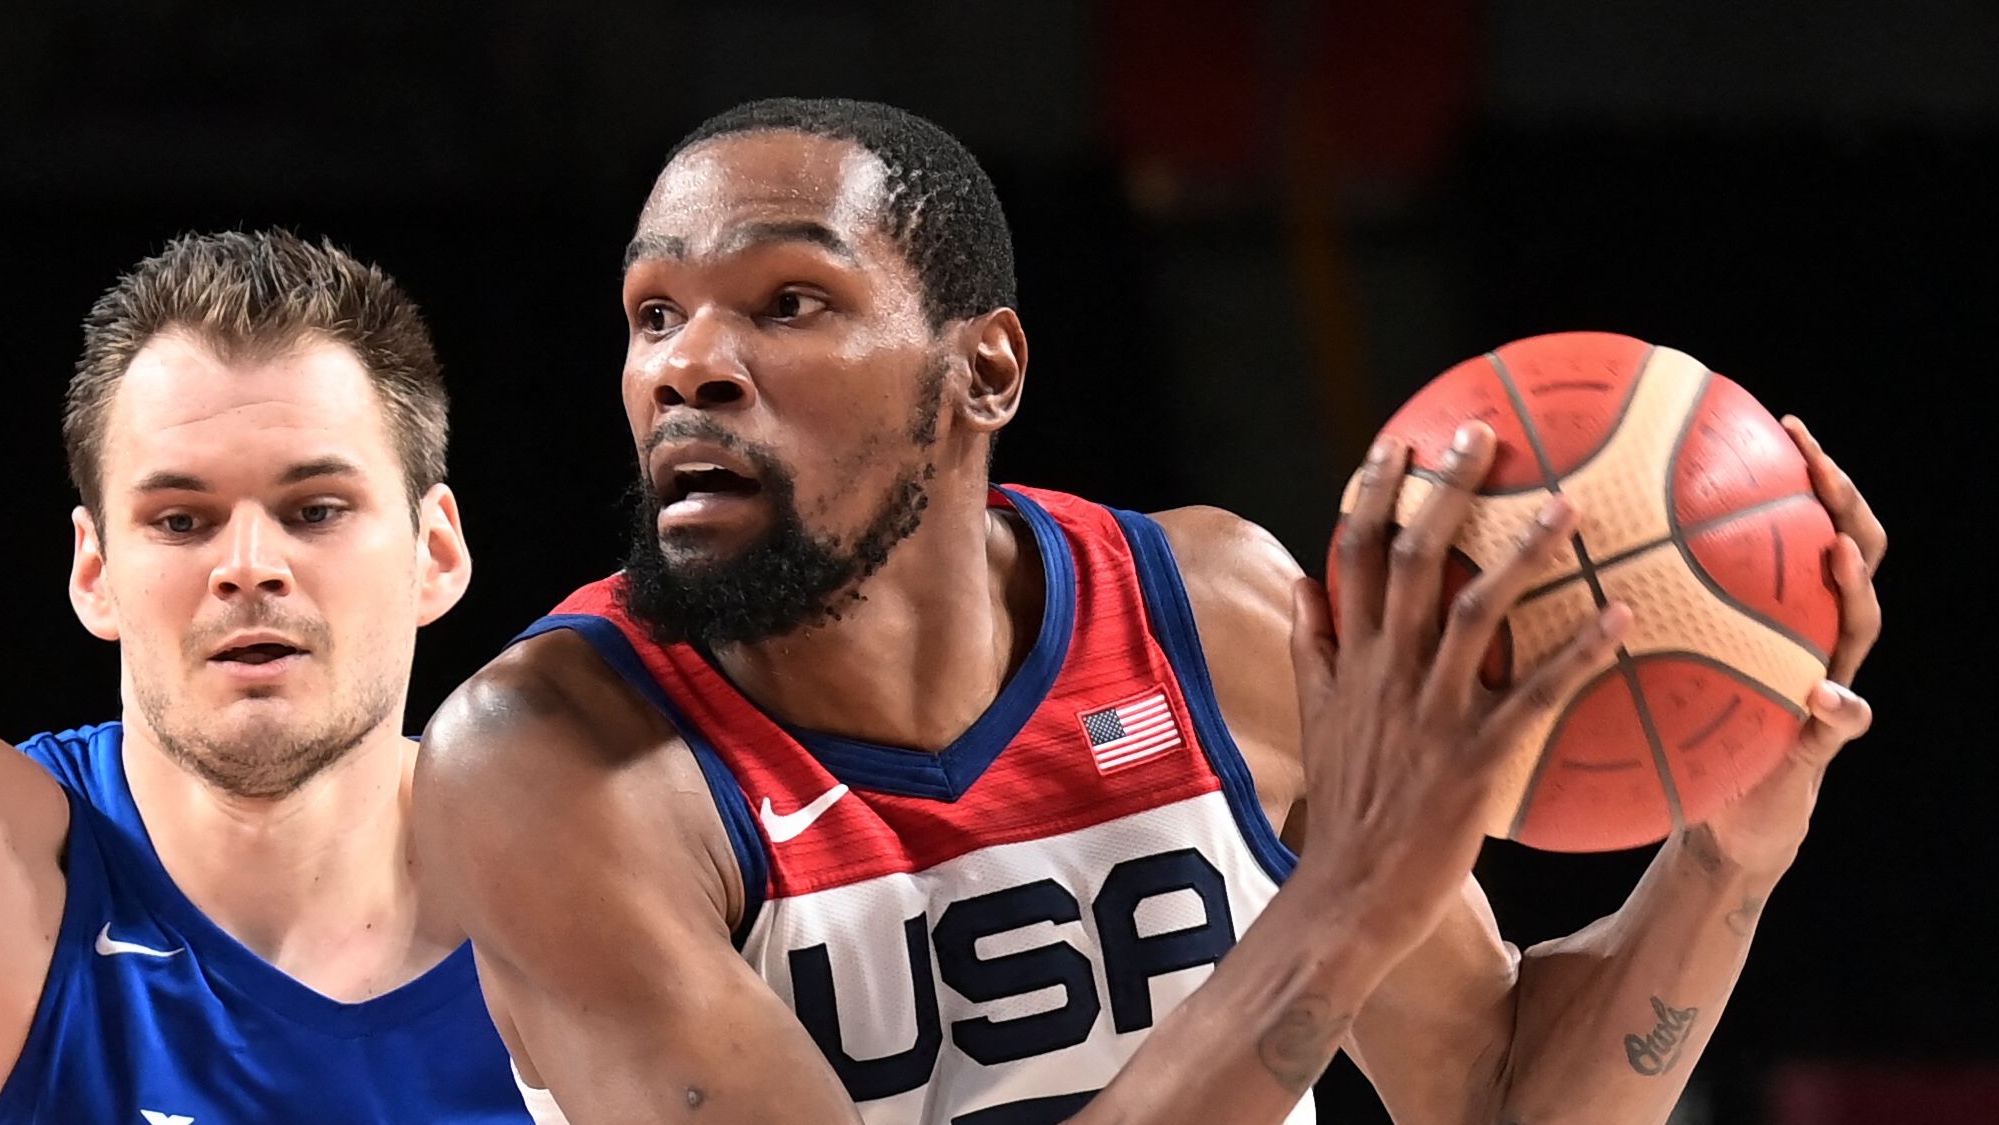 Team Usa Vs Spain Men S Basketball Live Stream Olympics Channels Start Time And How To Watch Online Tom S Guide